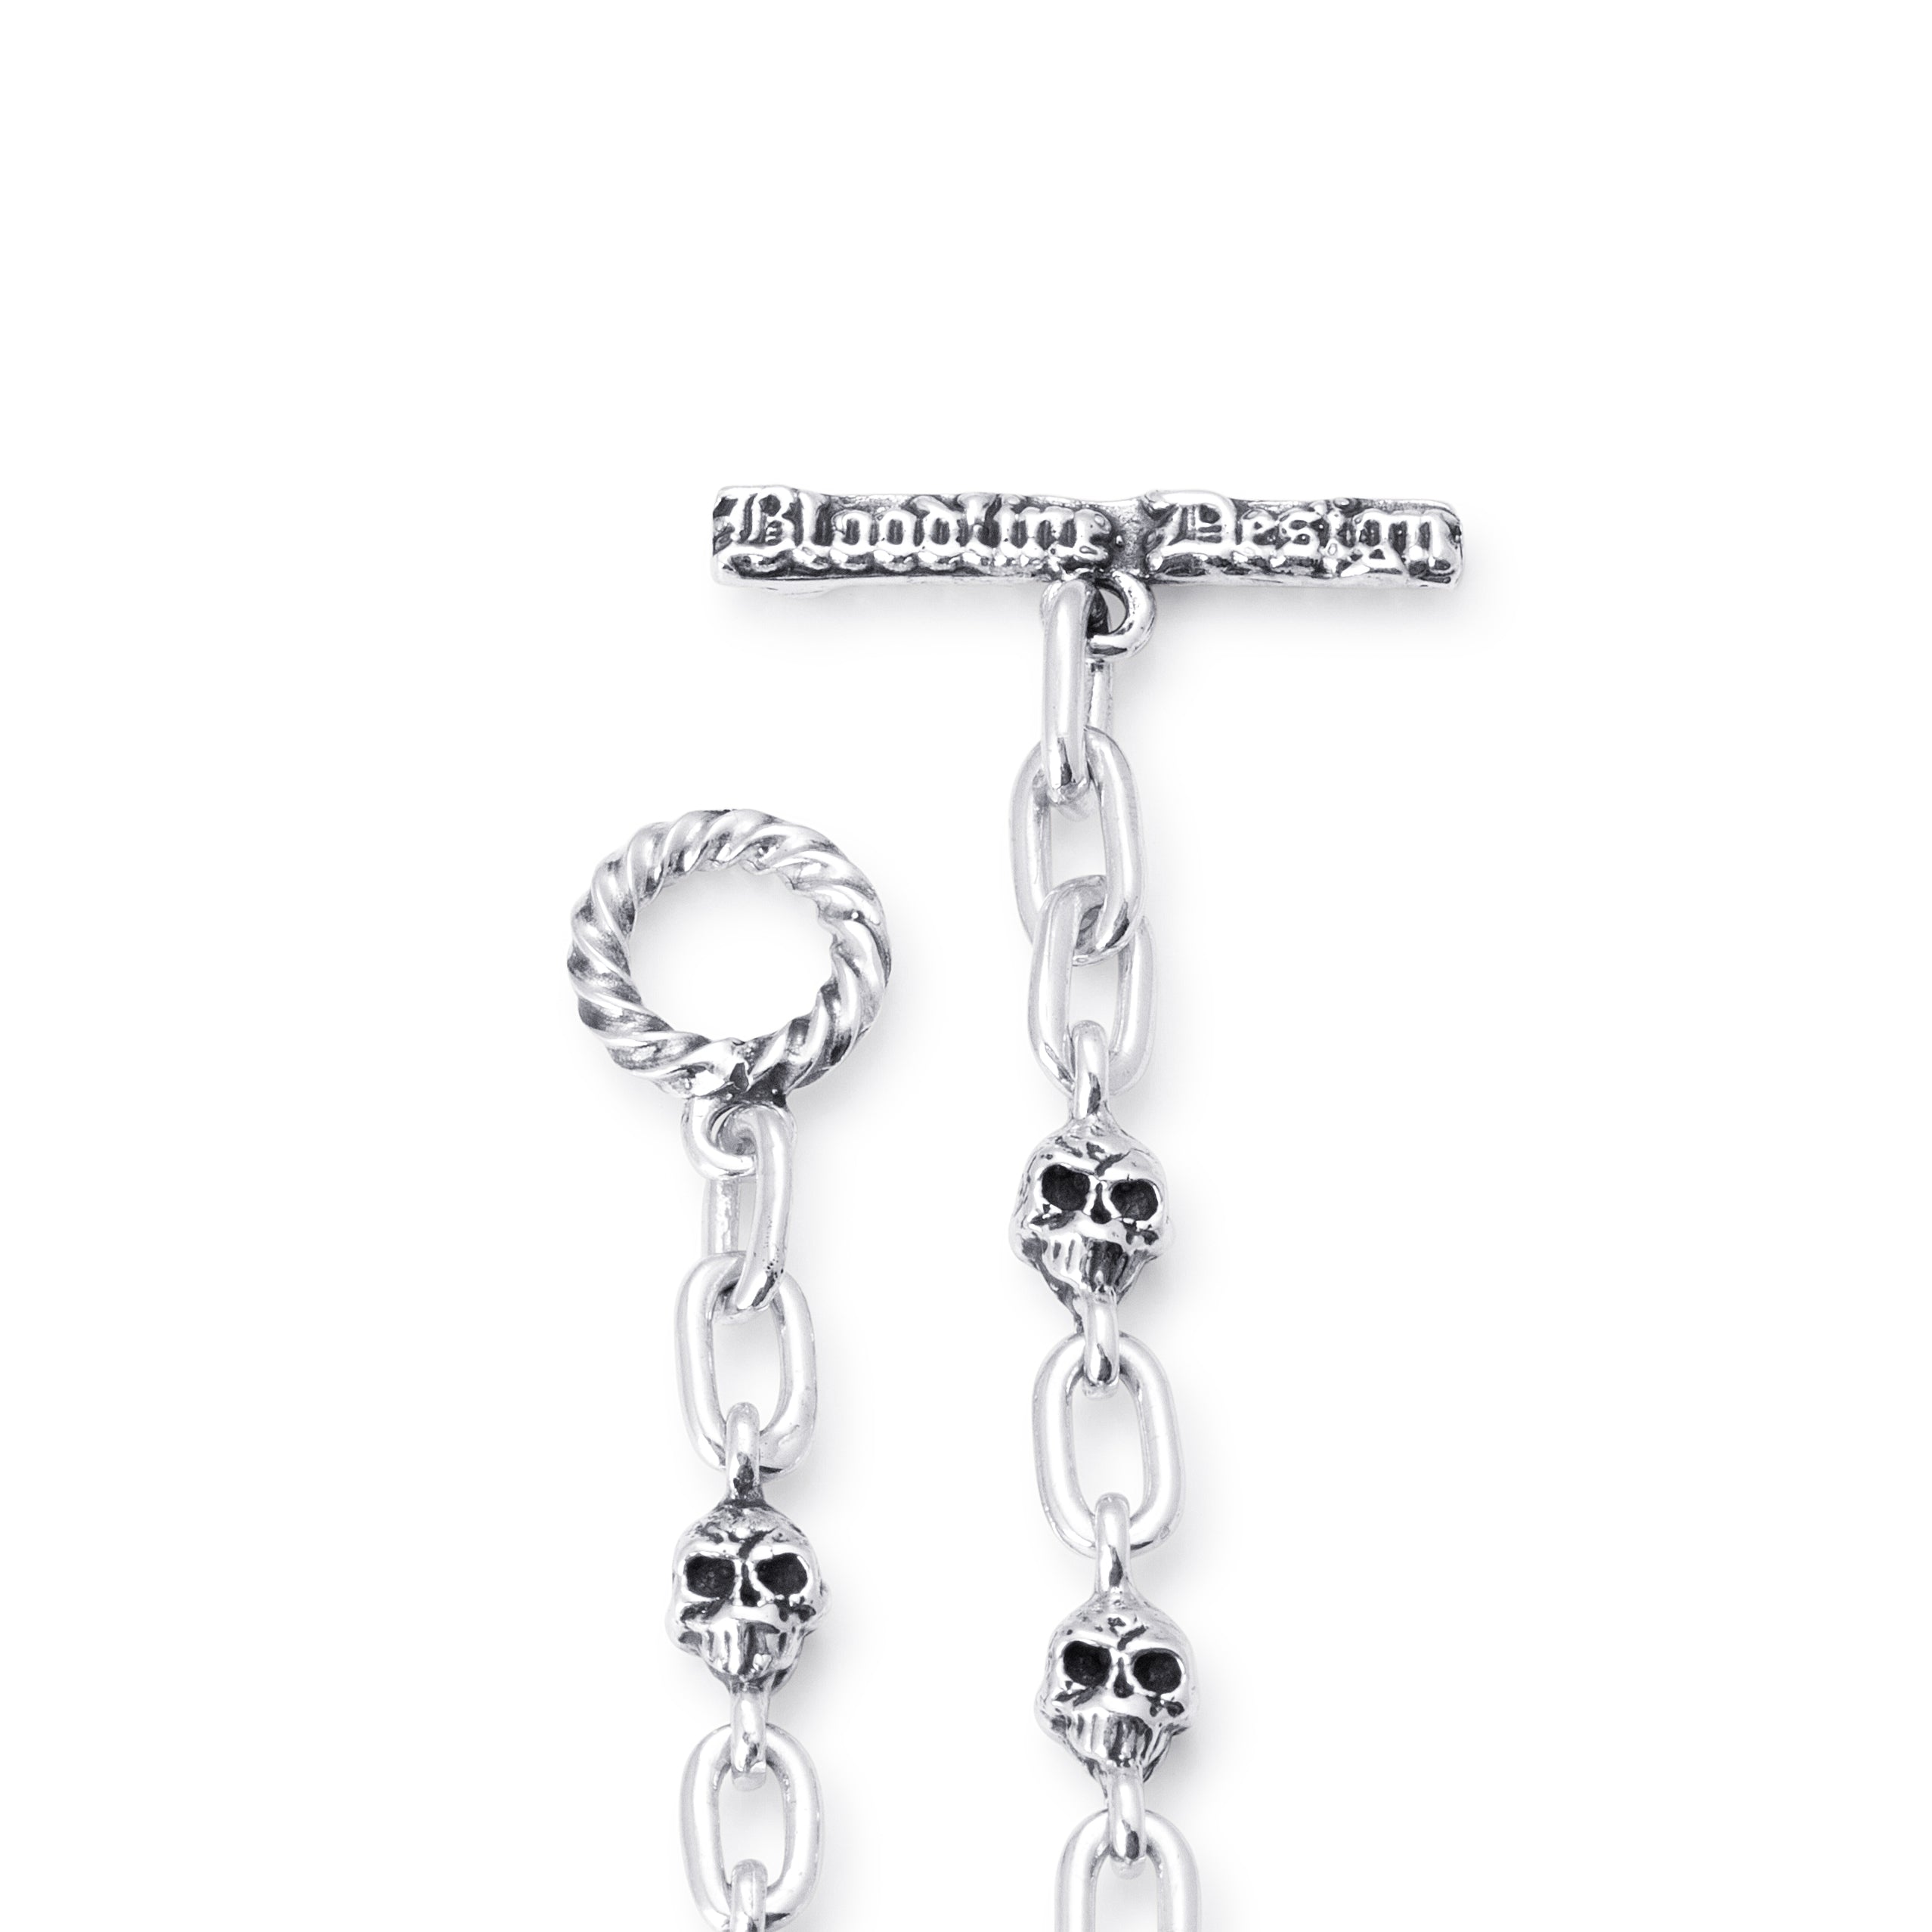 Solid Sterling Silver T-toggle clasp branded with 